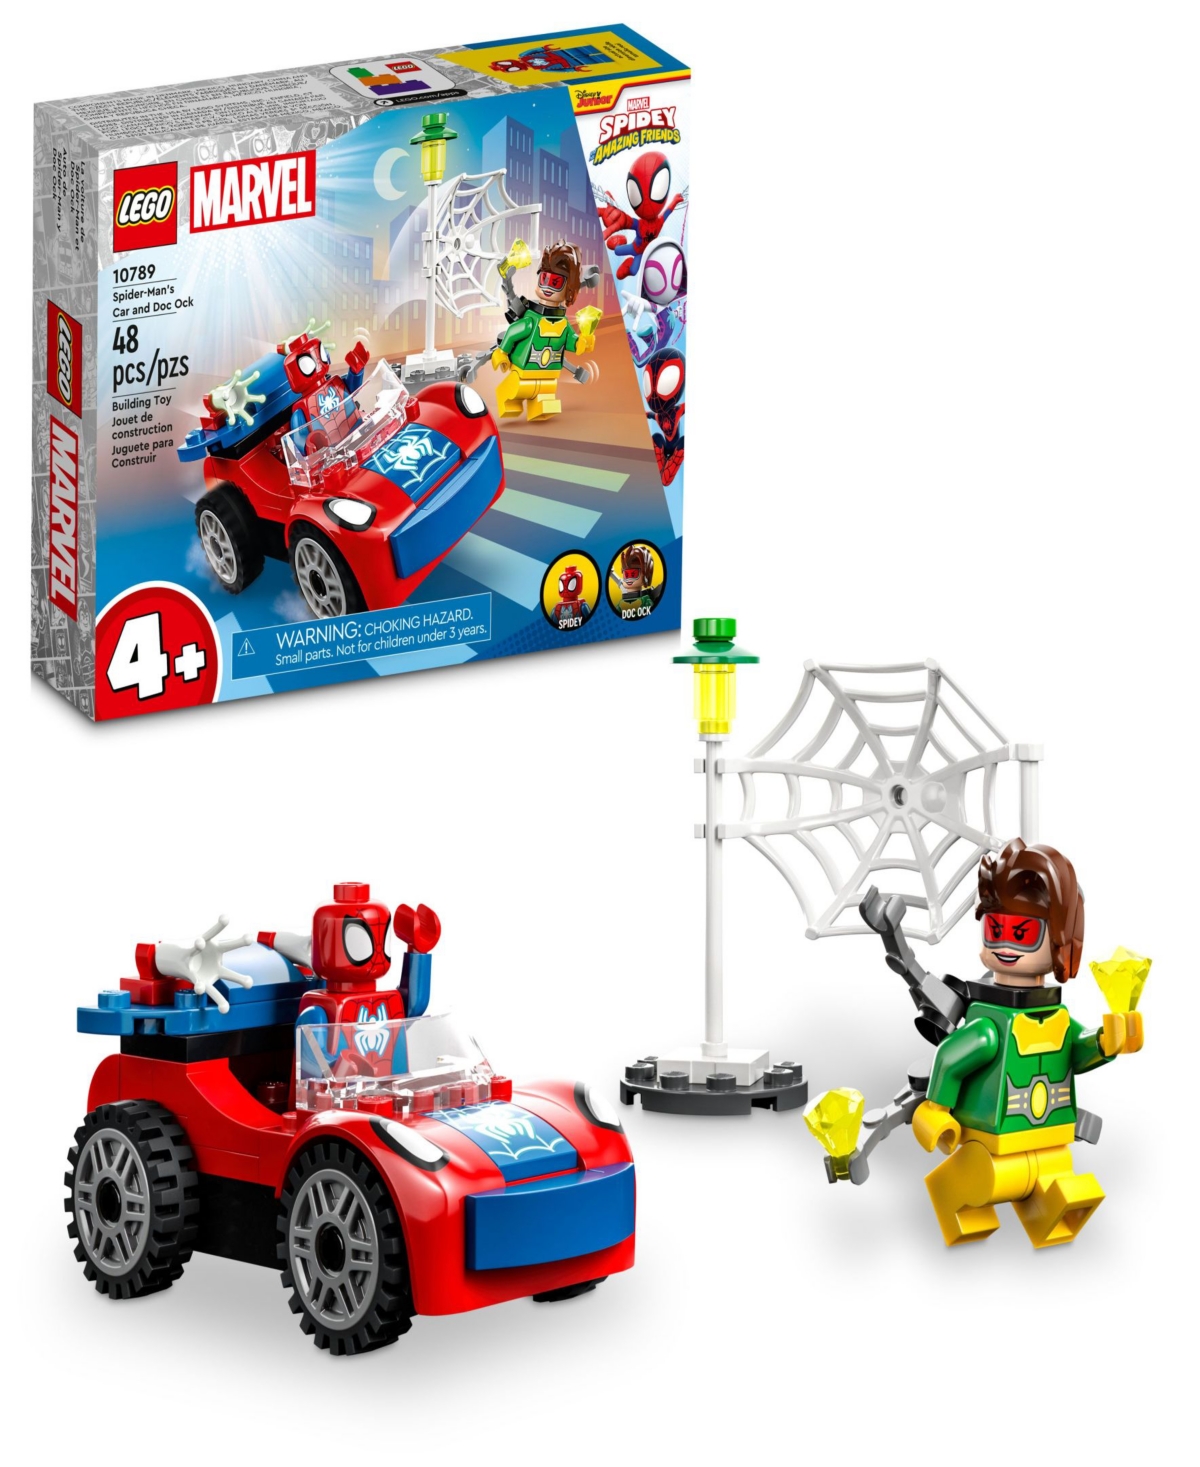 Lego Marvel 10789 Spidey Spider-man's Car And Doc Ock Toy Building Set With Spidey & Doc Ock Minifigures In Multicolor